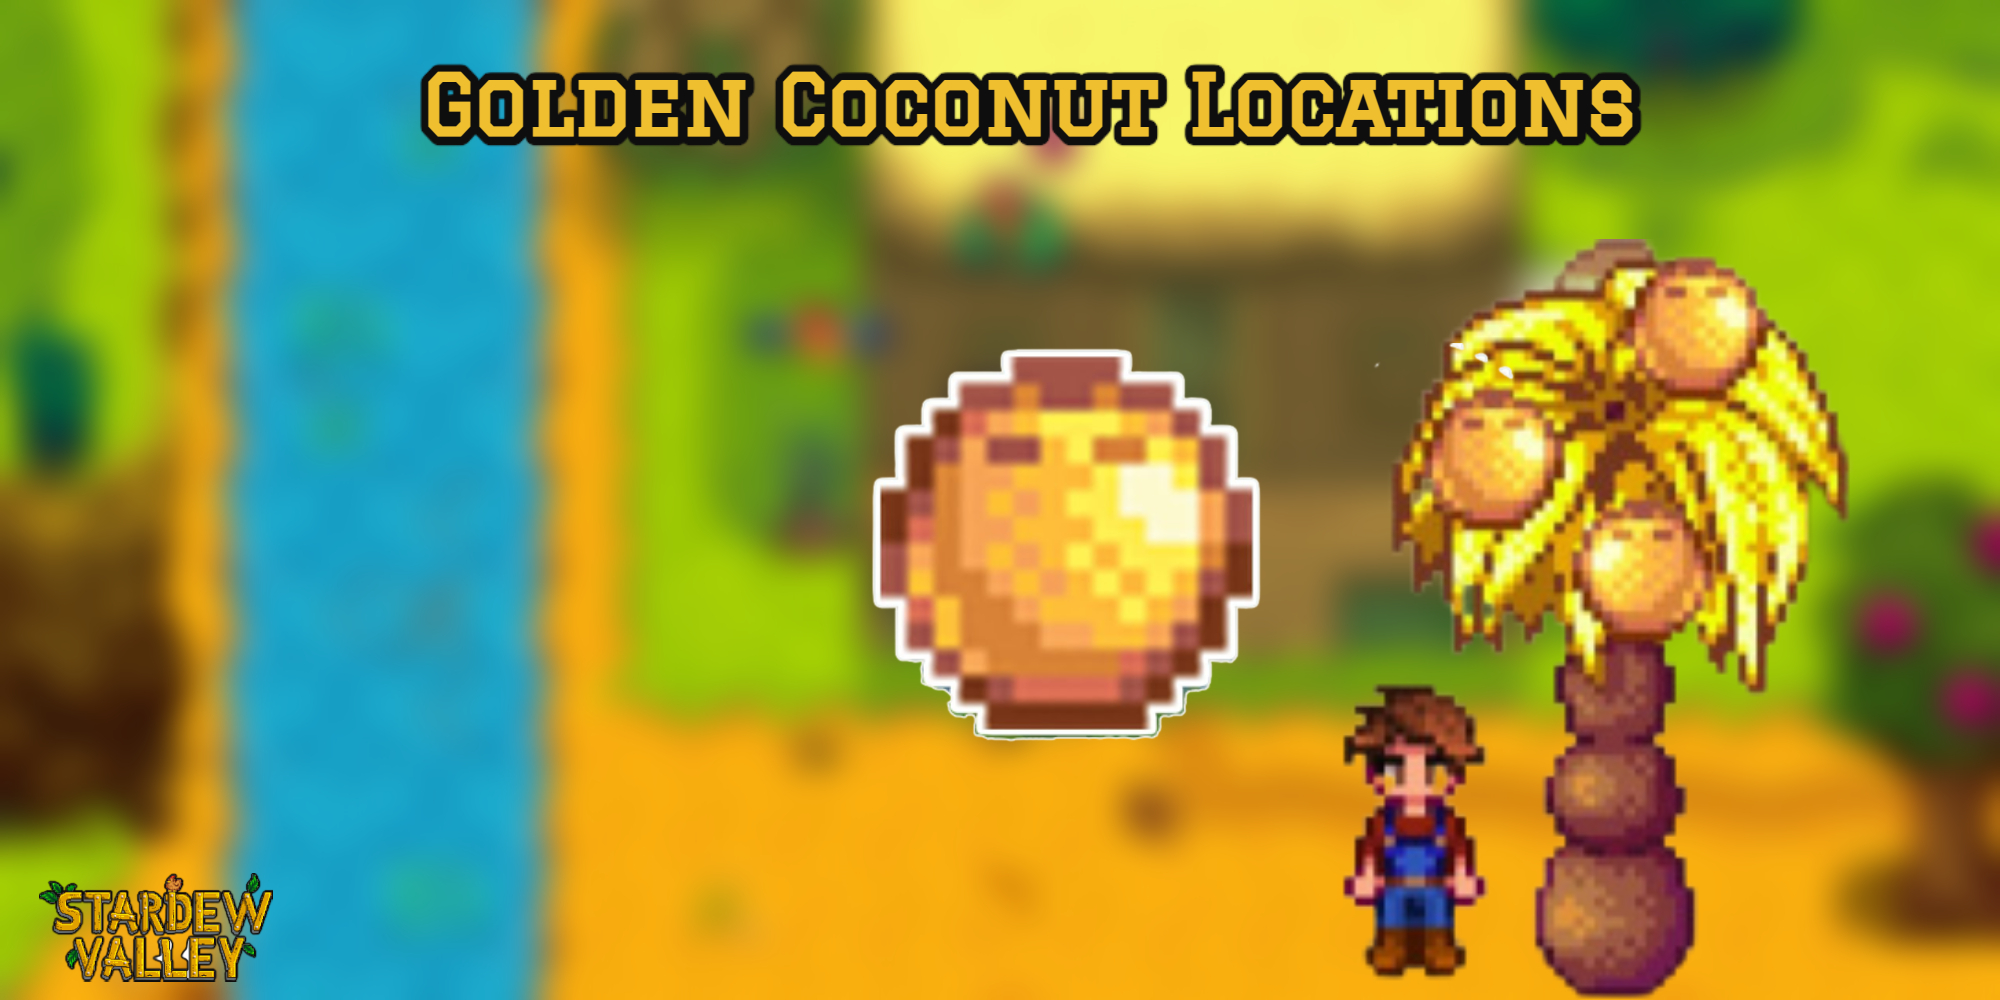 You are currently viewing Stardew Valley Golden Coconut Locations